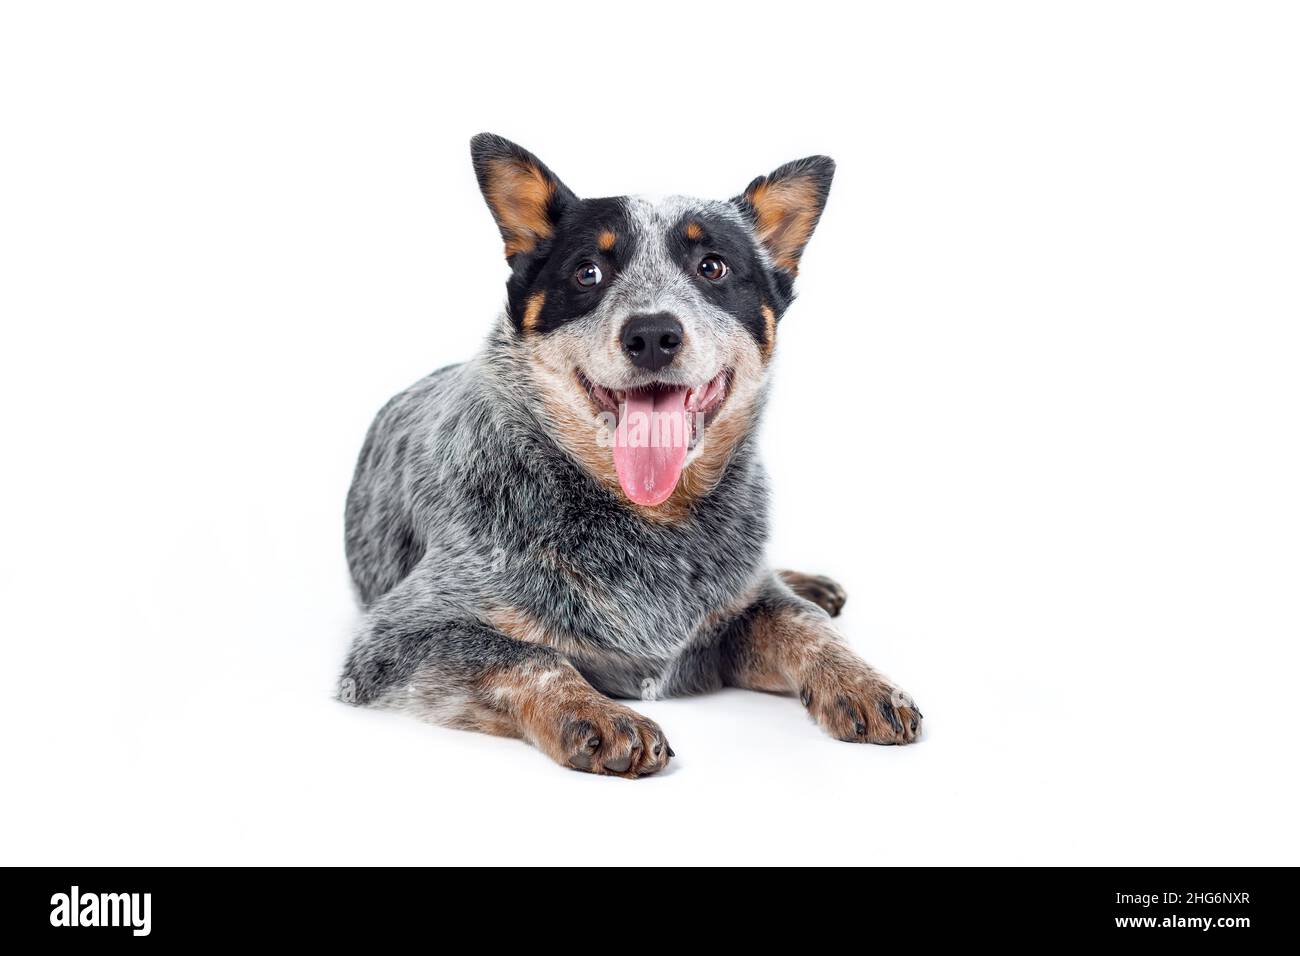 Cute happy blue heeler or australian cattle dog puppy with tongue out lying down isolated against white background Stock Photo